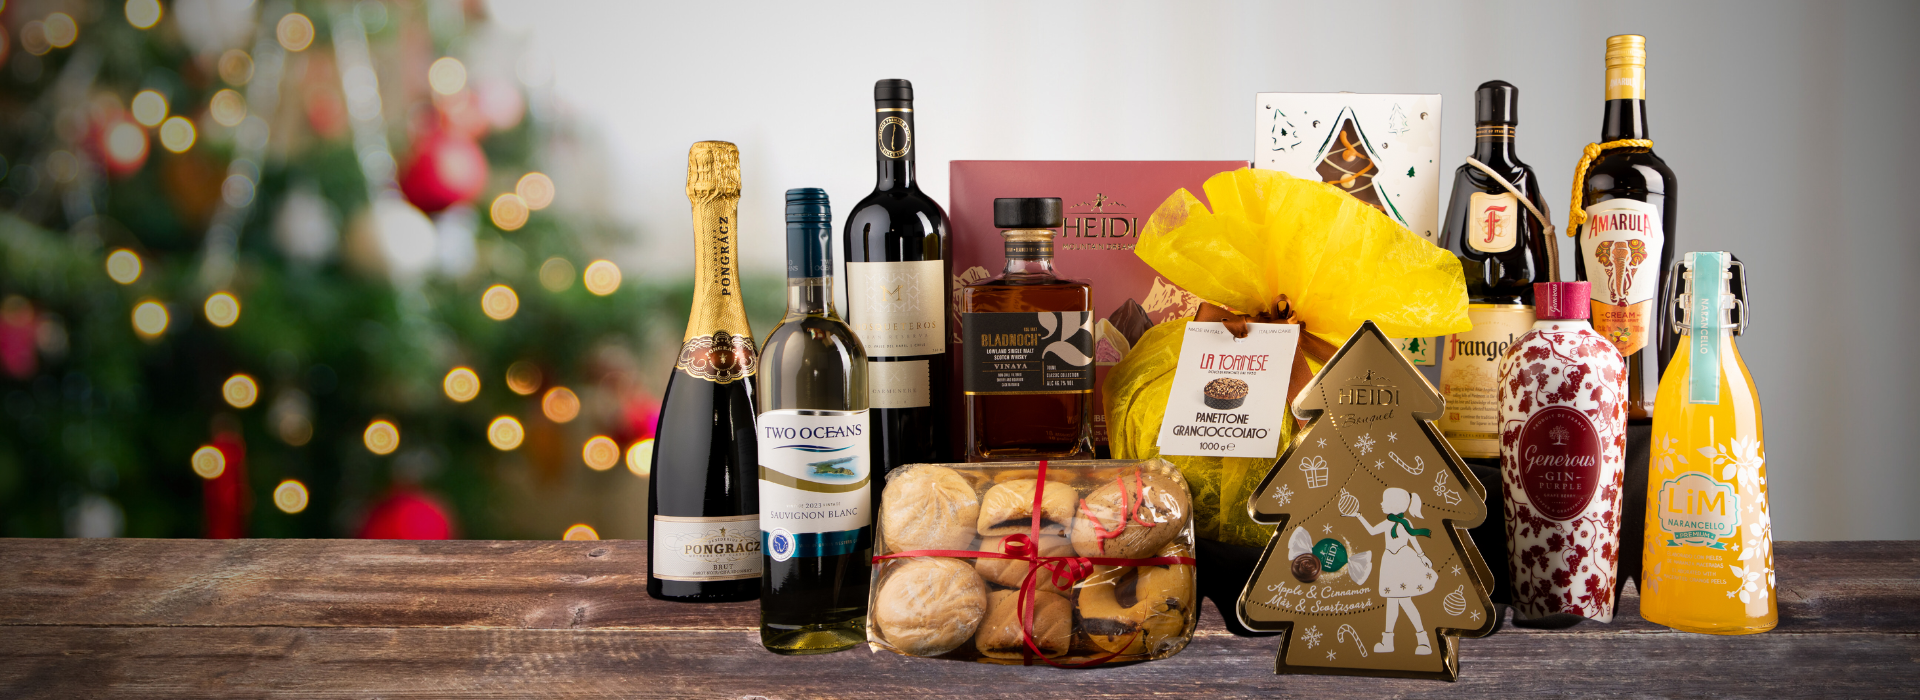 Hampers…. A tradition lasting hundreds of years